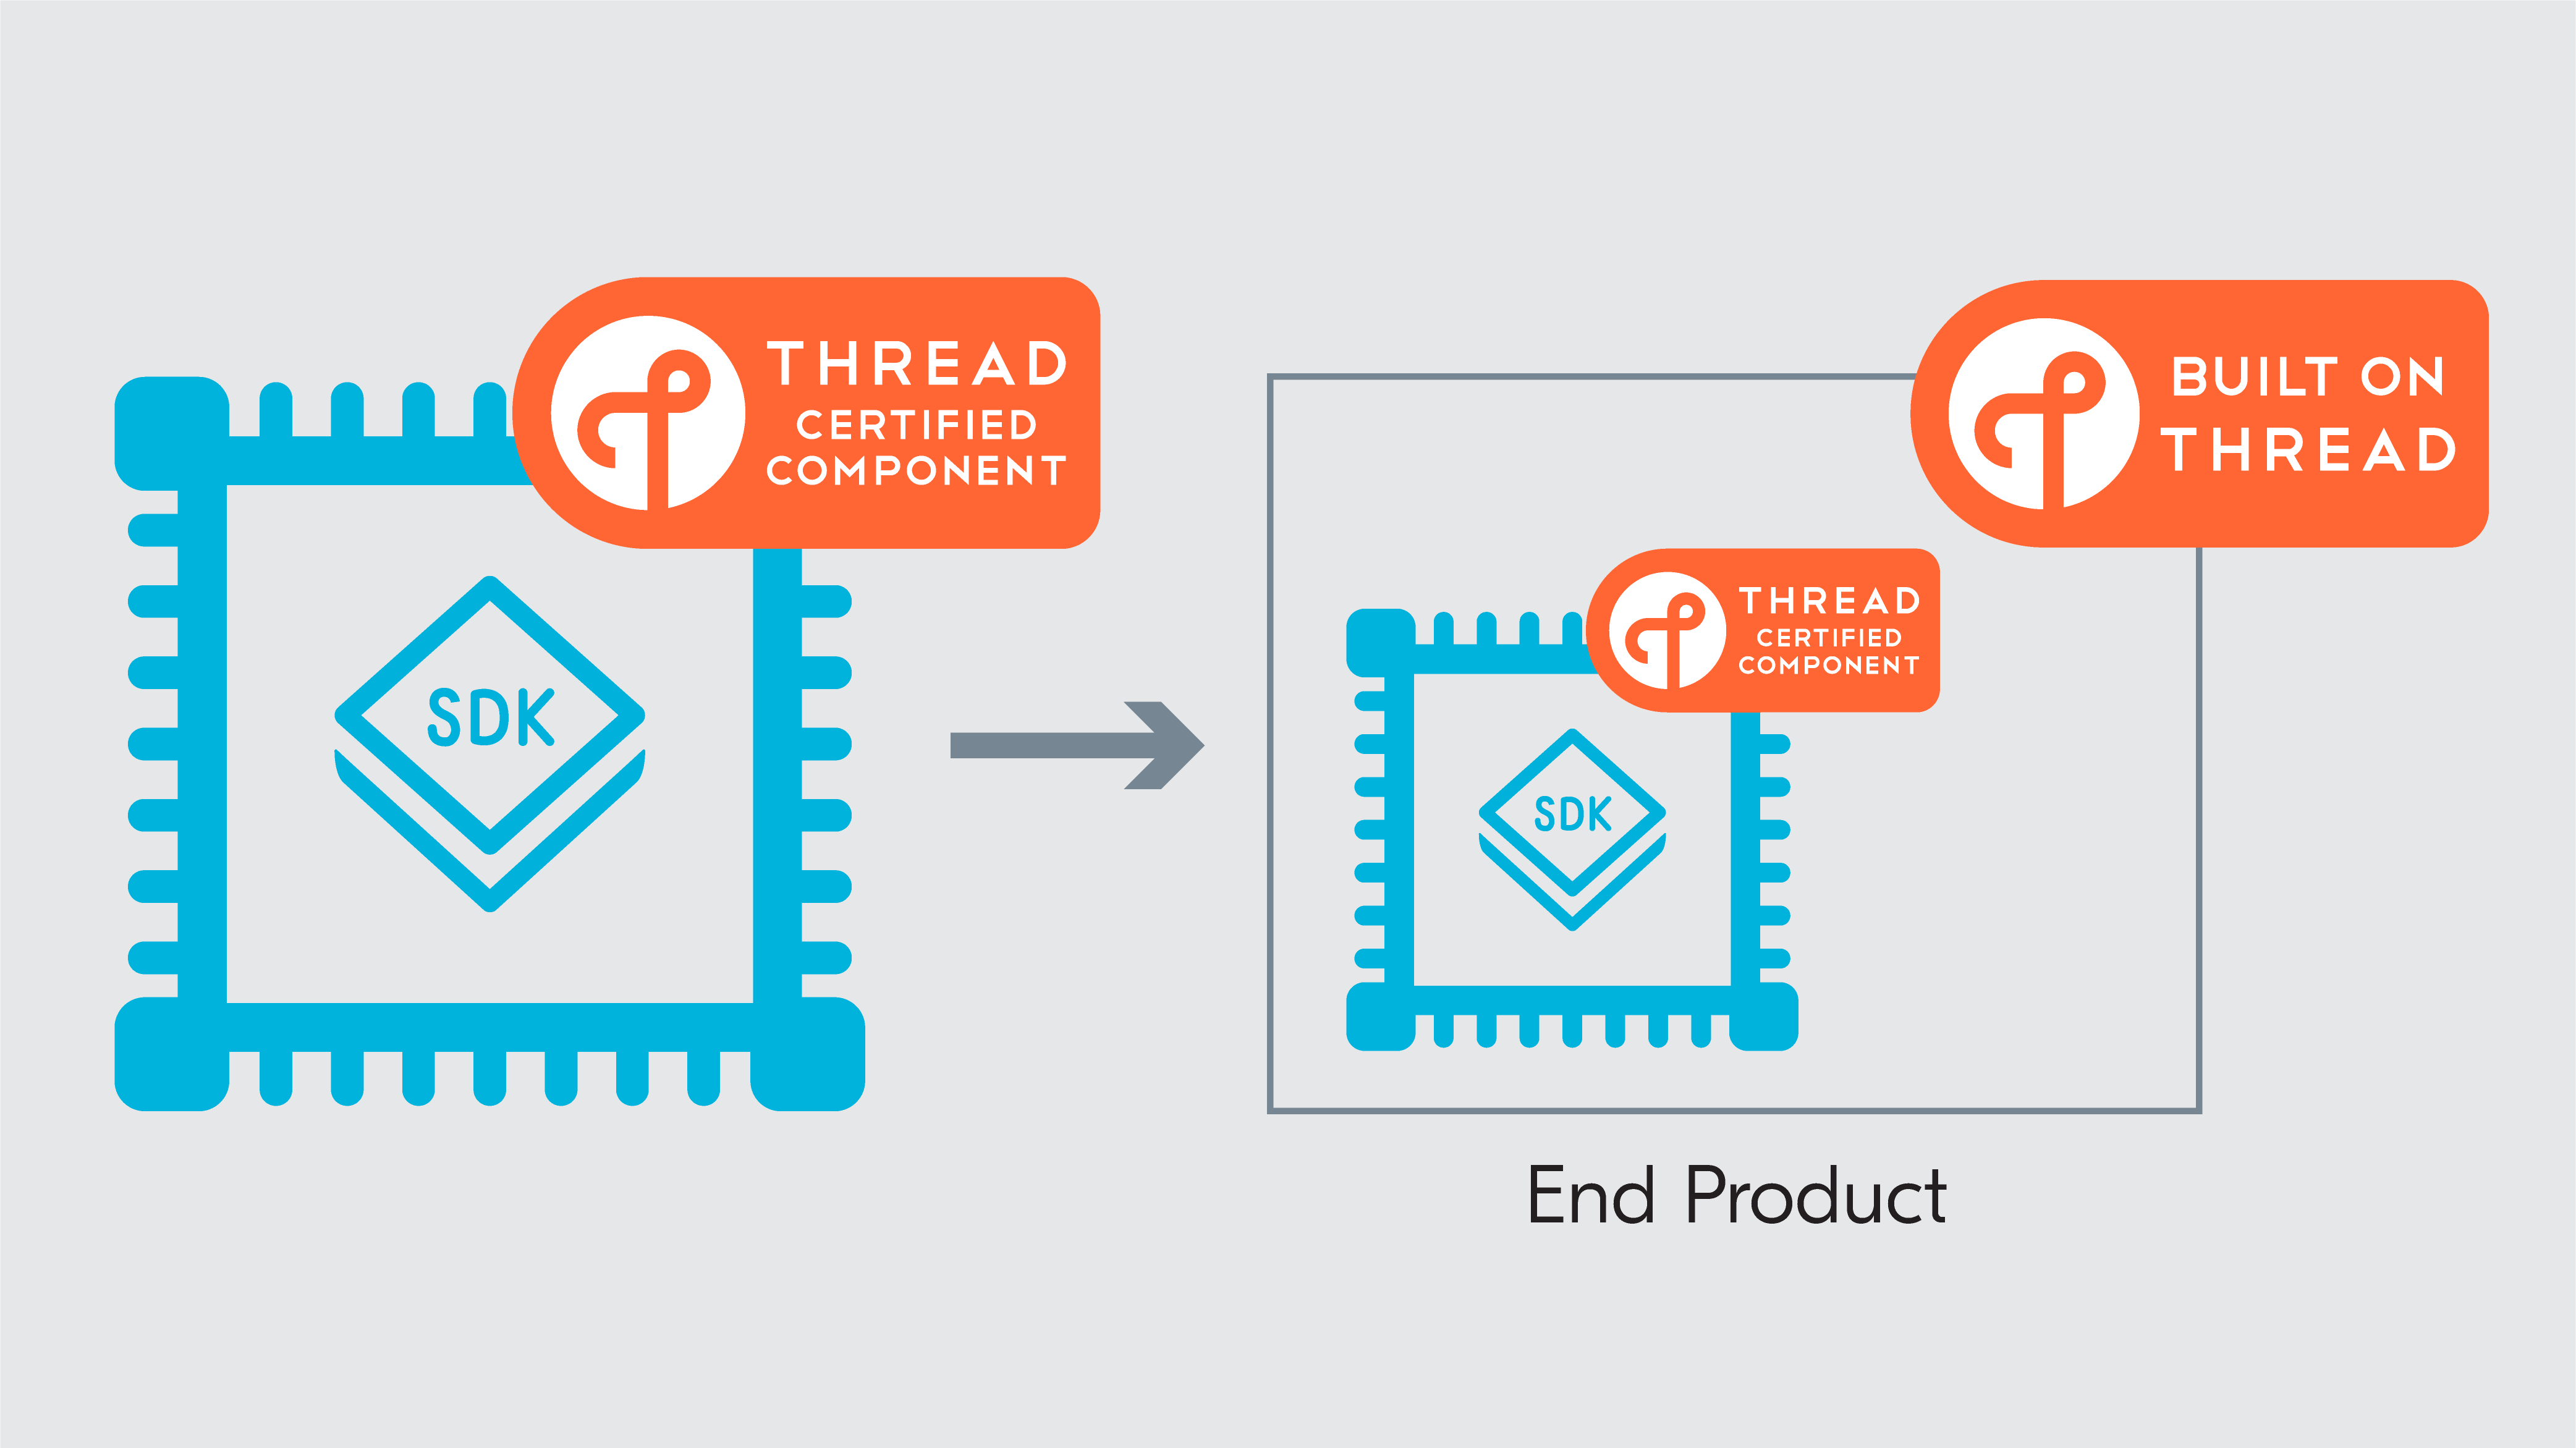 Thread Certification by inheritance facilitates project CHIP